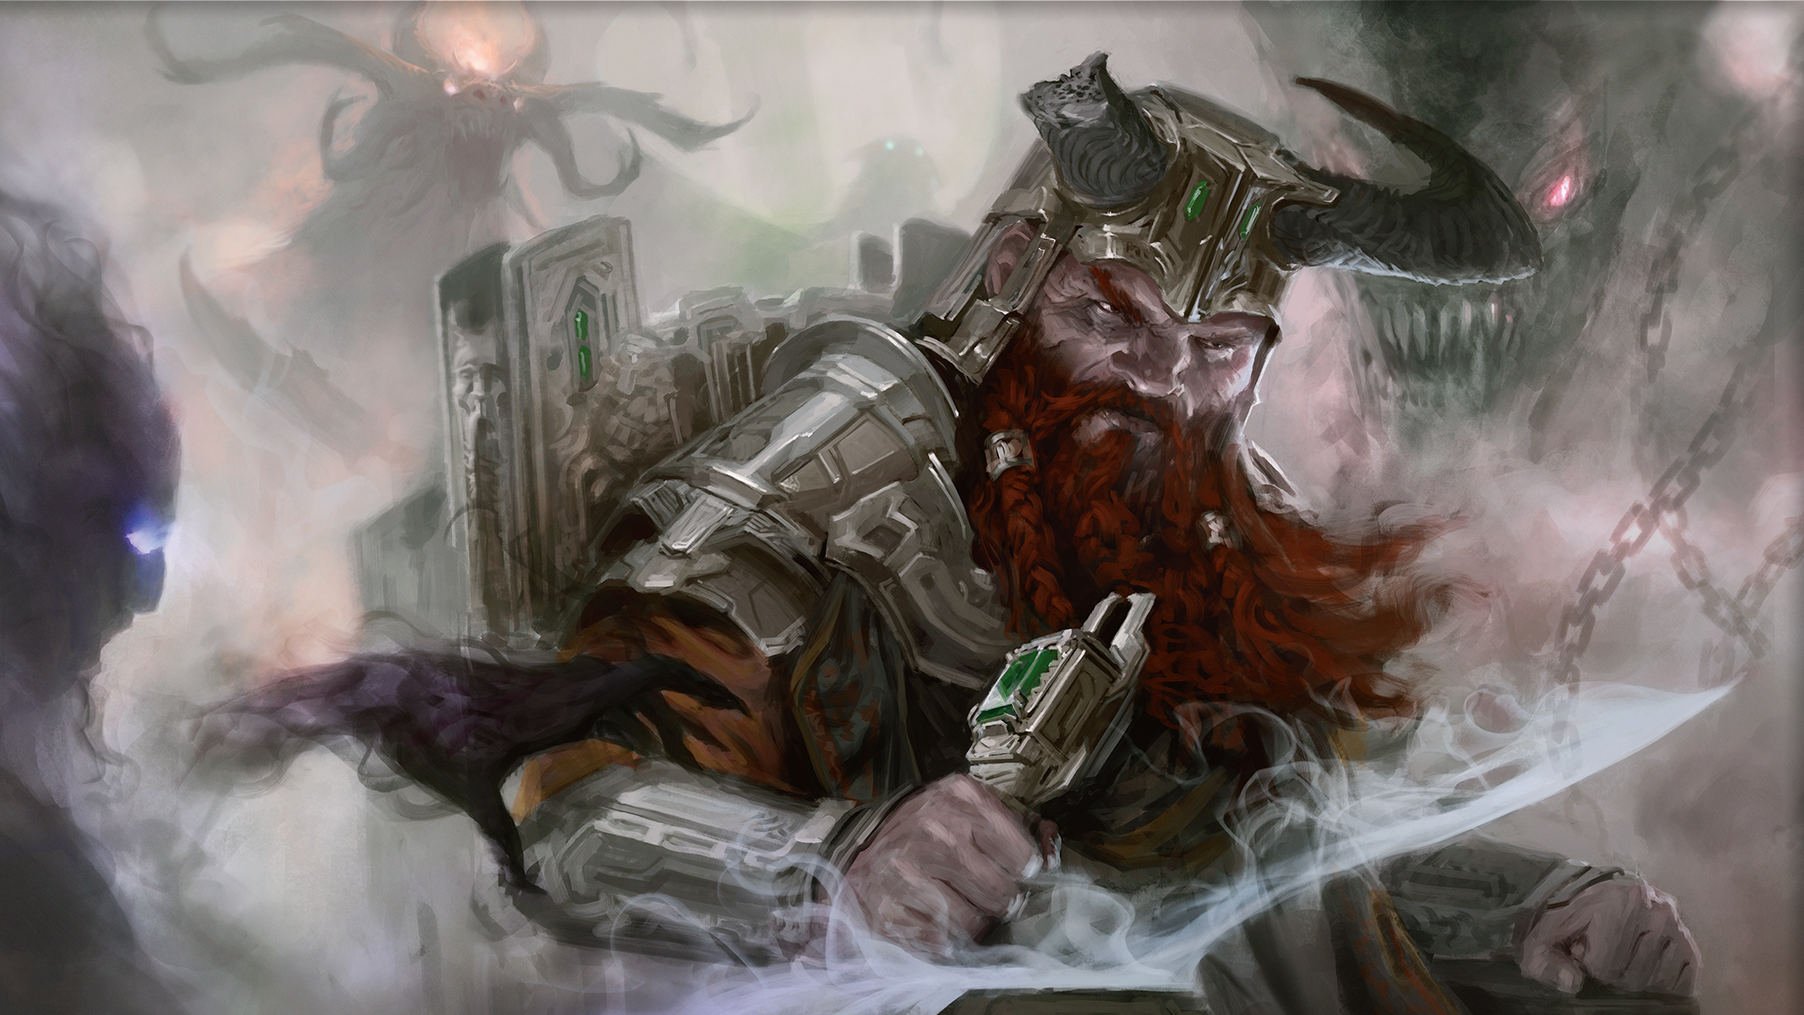 DnD Artificer 5E - Wizards of the Coast art of a dwarf sitting on a throne clutching a dagger